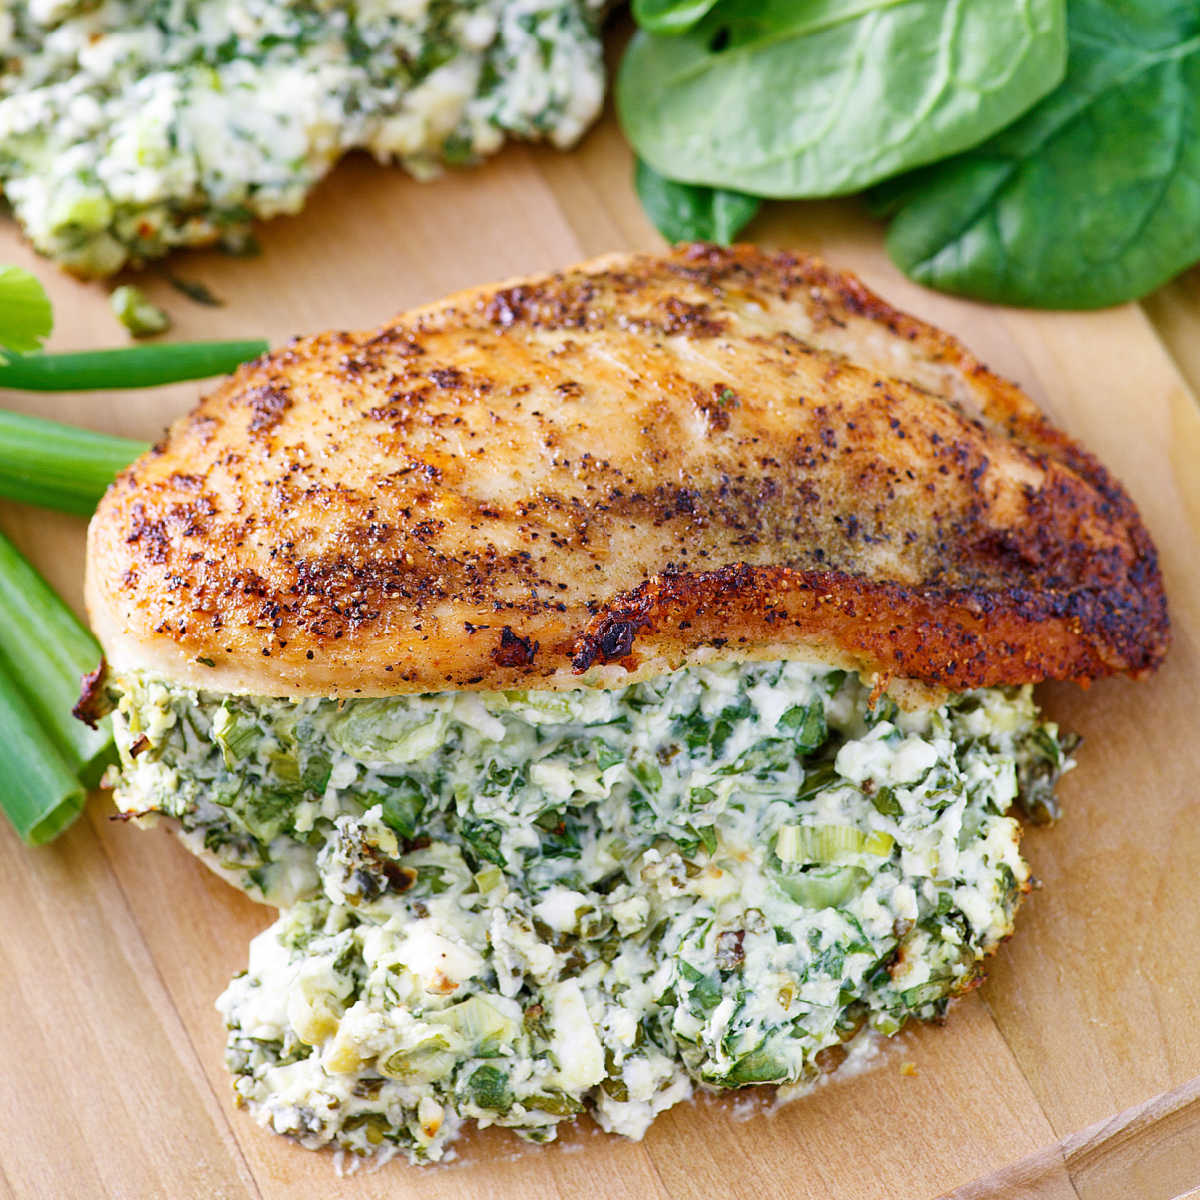 Nicely browned chicken breast stuffed with creamy spinach, green onion and cheese mixture.